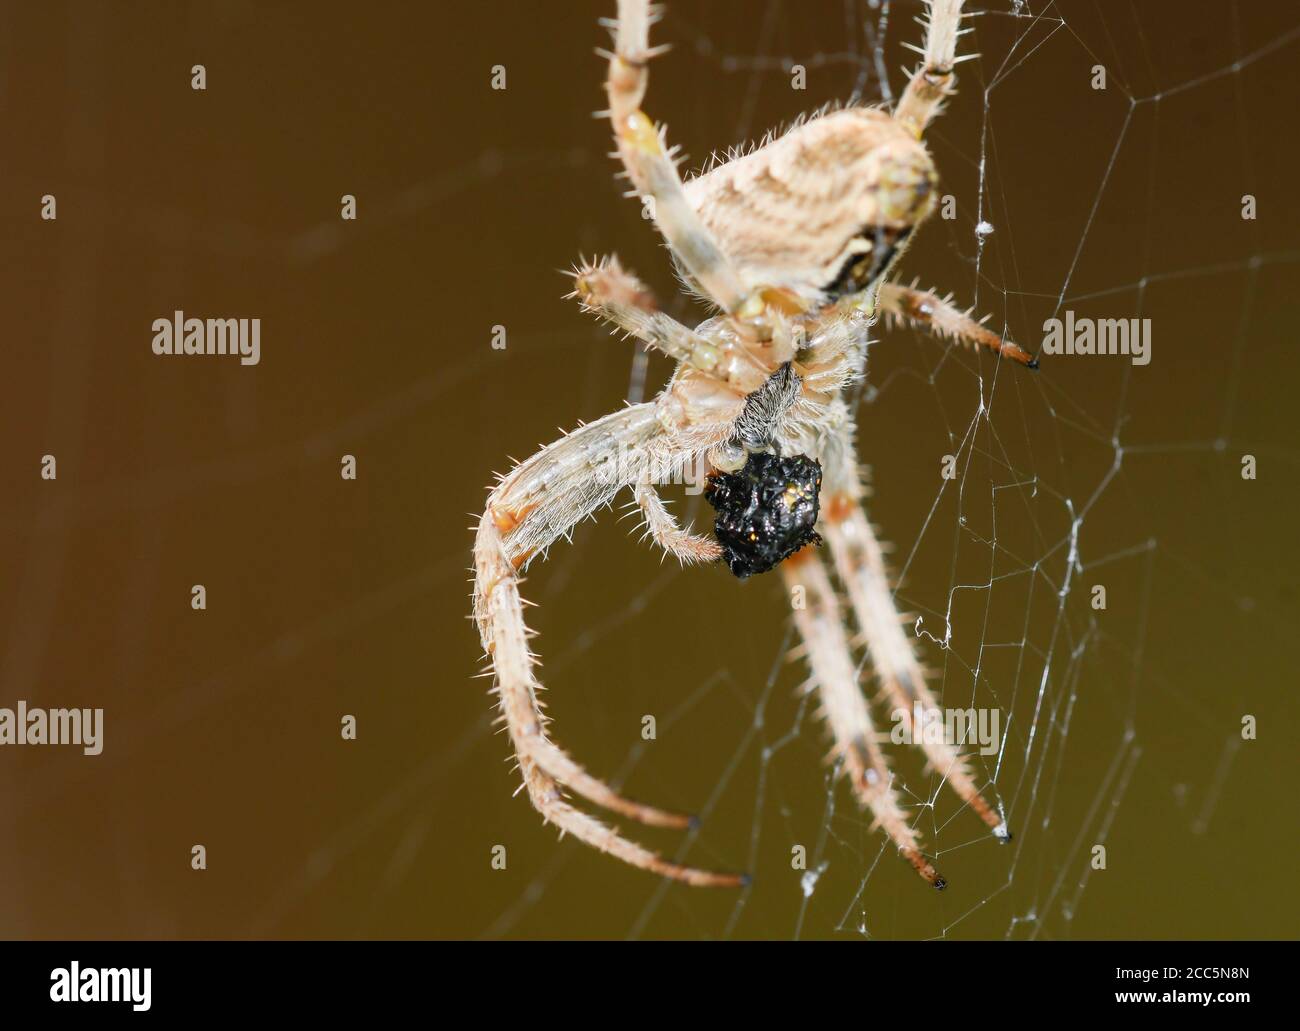 Close-up of cross spider in its spider web feeding on a prey. Stock Photo